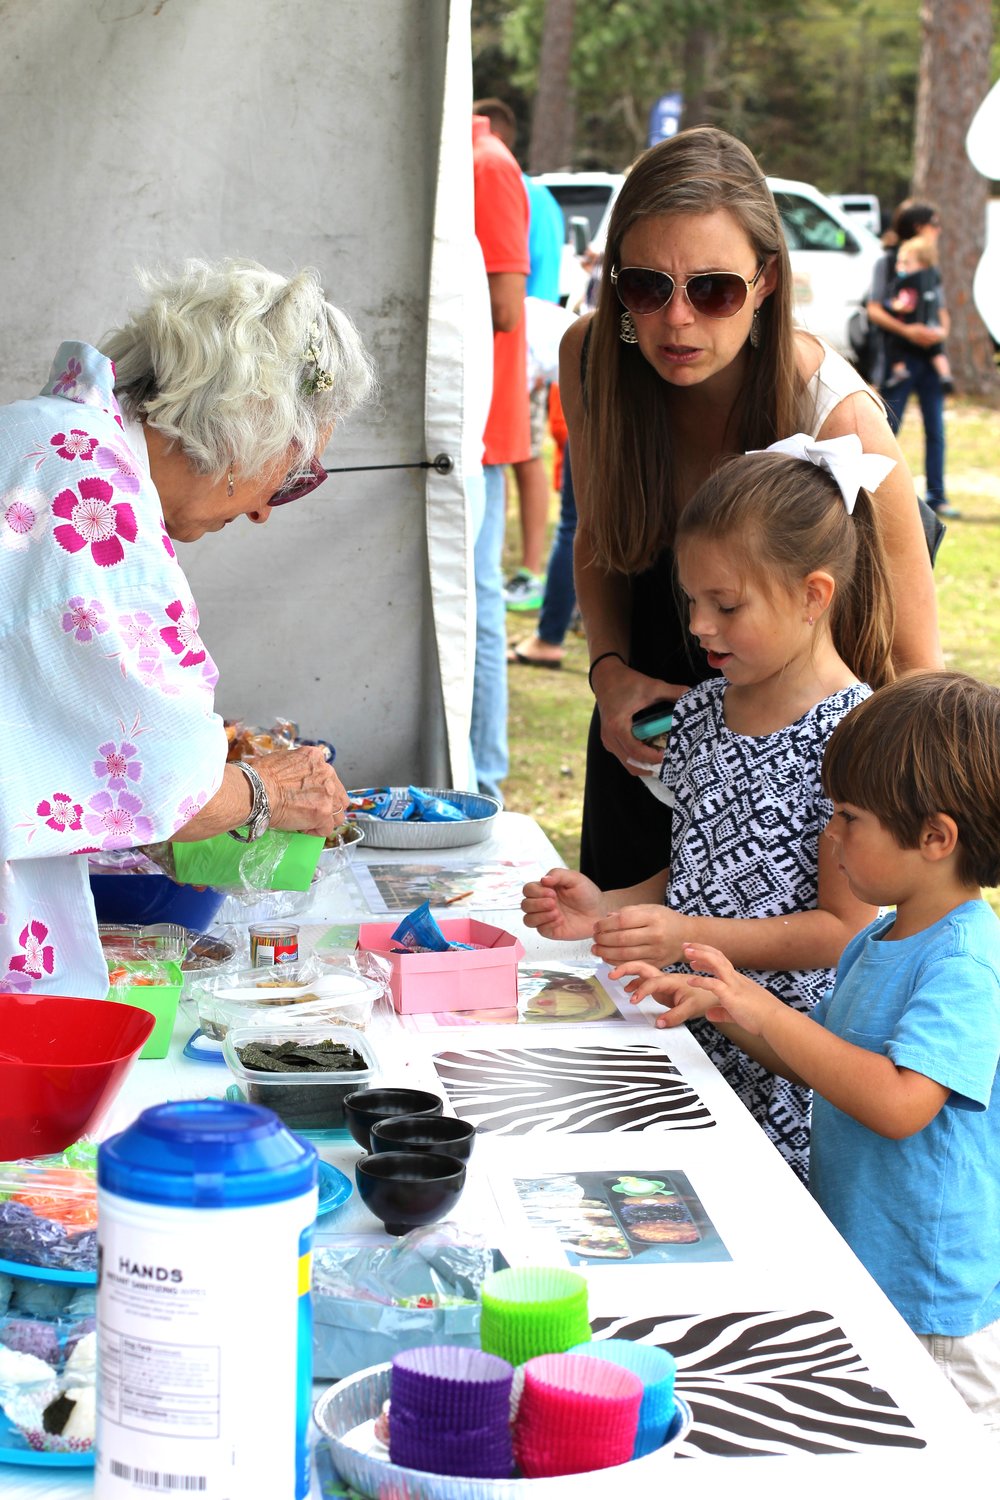 Kids' Art Alley offers young festival goers plenty of hands-on fun. Children can dig their fingers into clay, make sand art, enjoy games, watch live demonstrations and take home their own works of art.